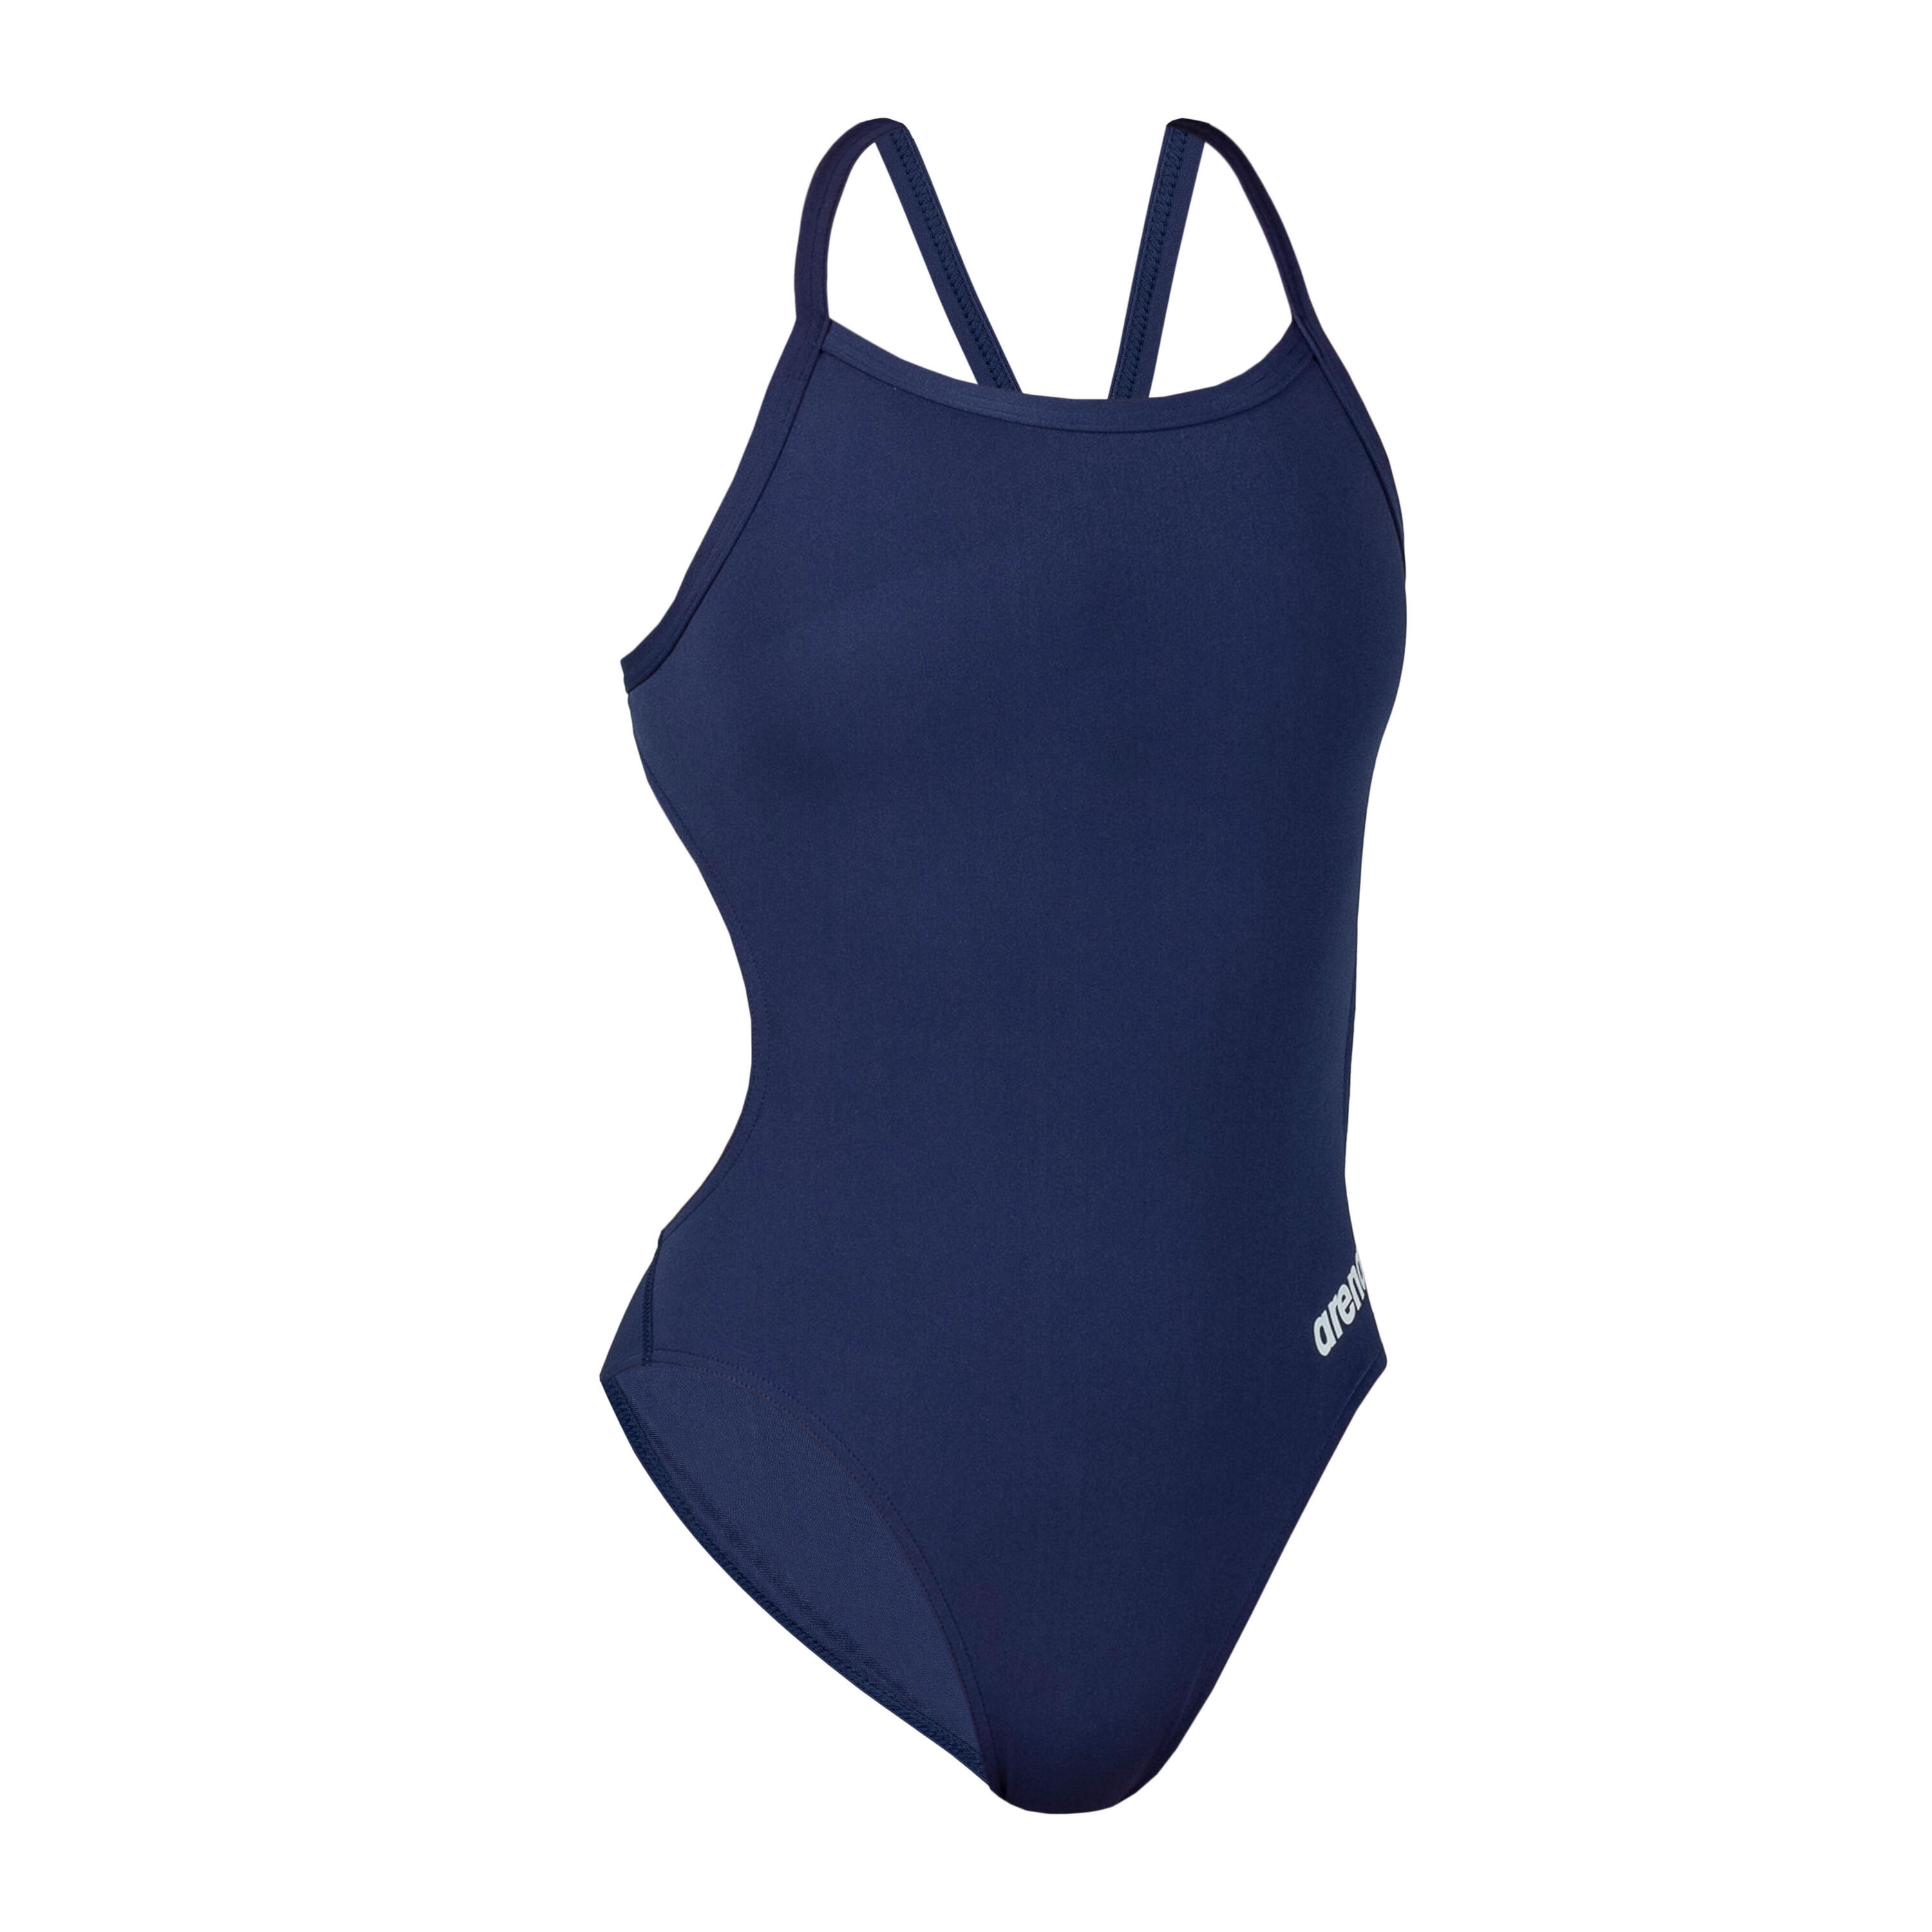 Women's 1-piece Swimsuit ARENA NEW SOLID Blue 4/4